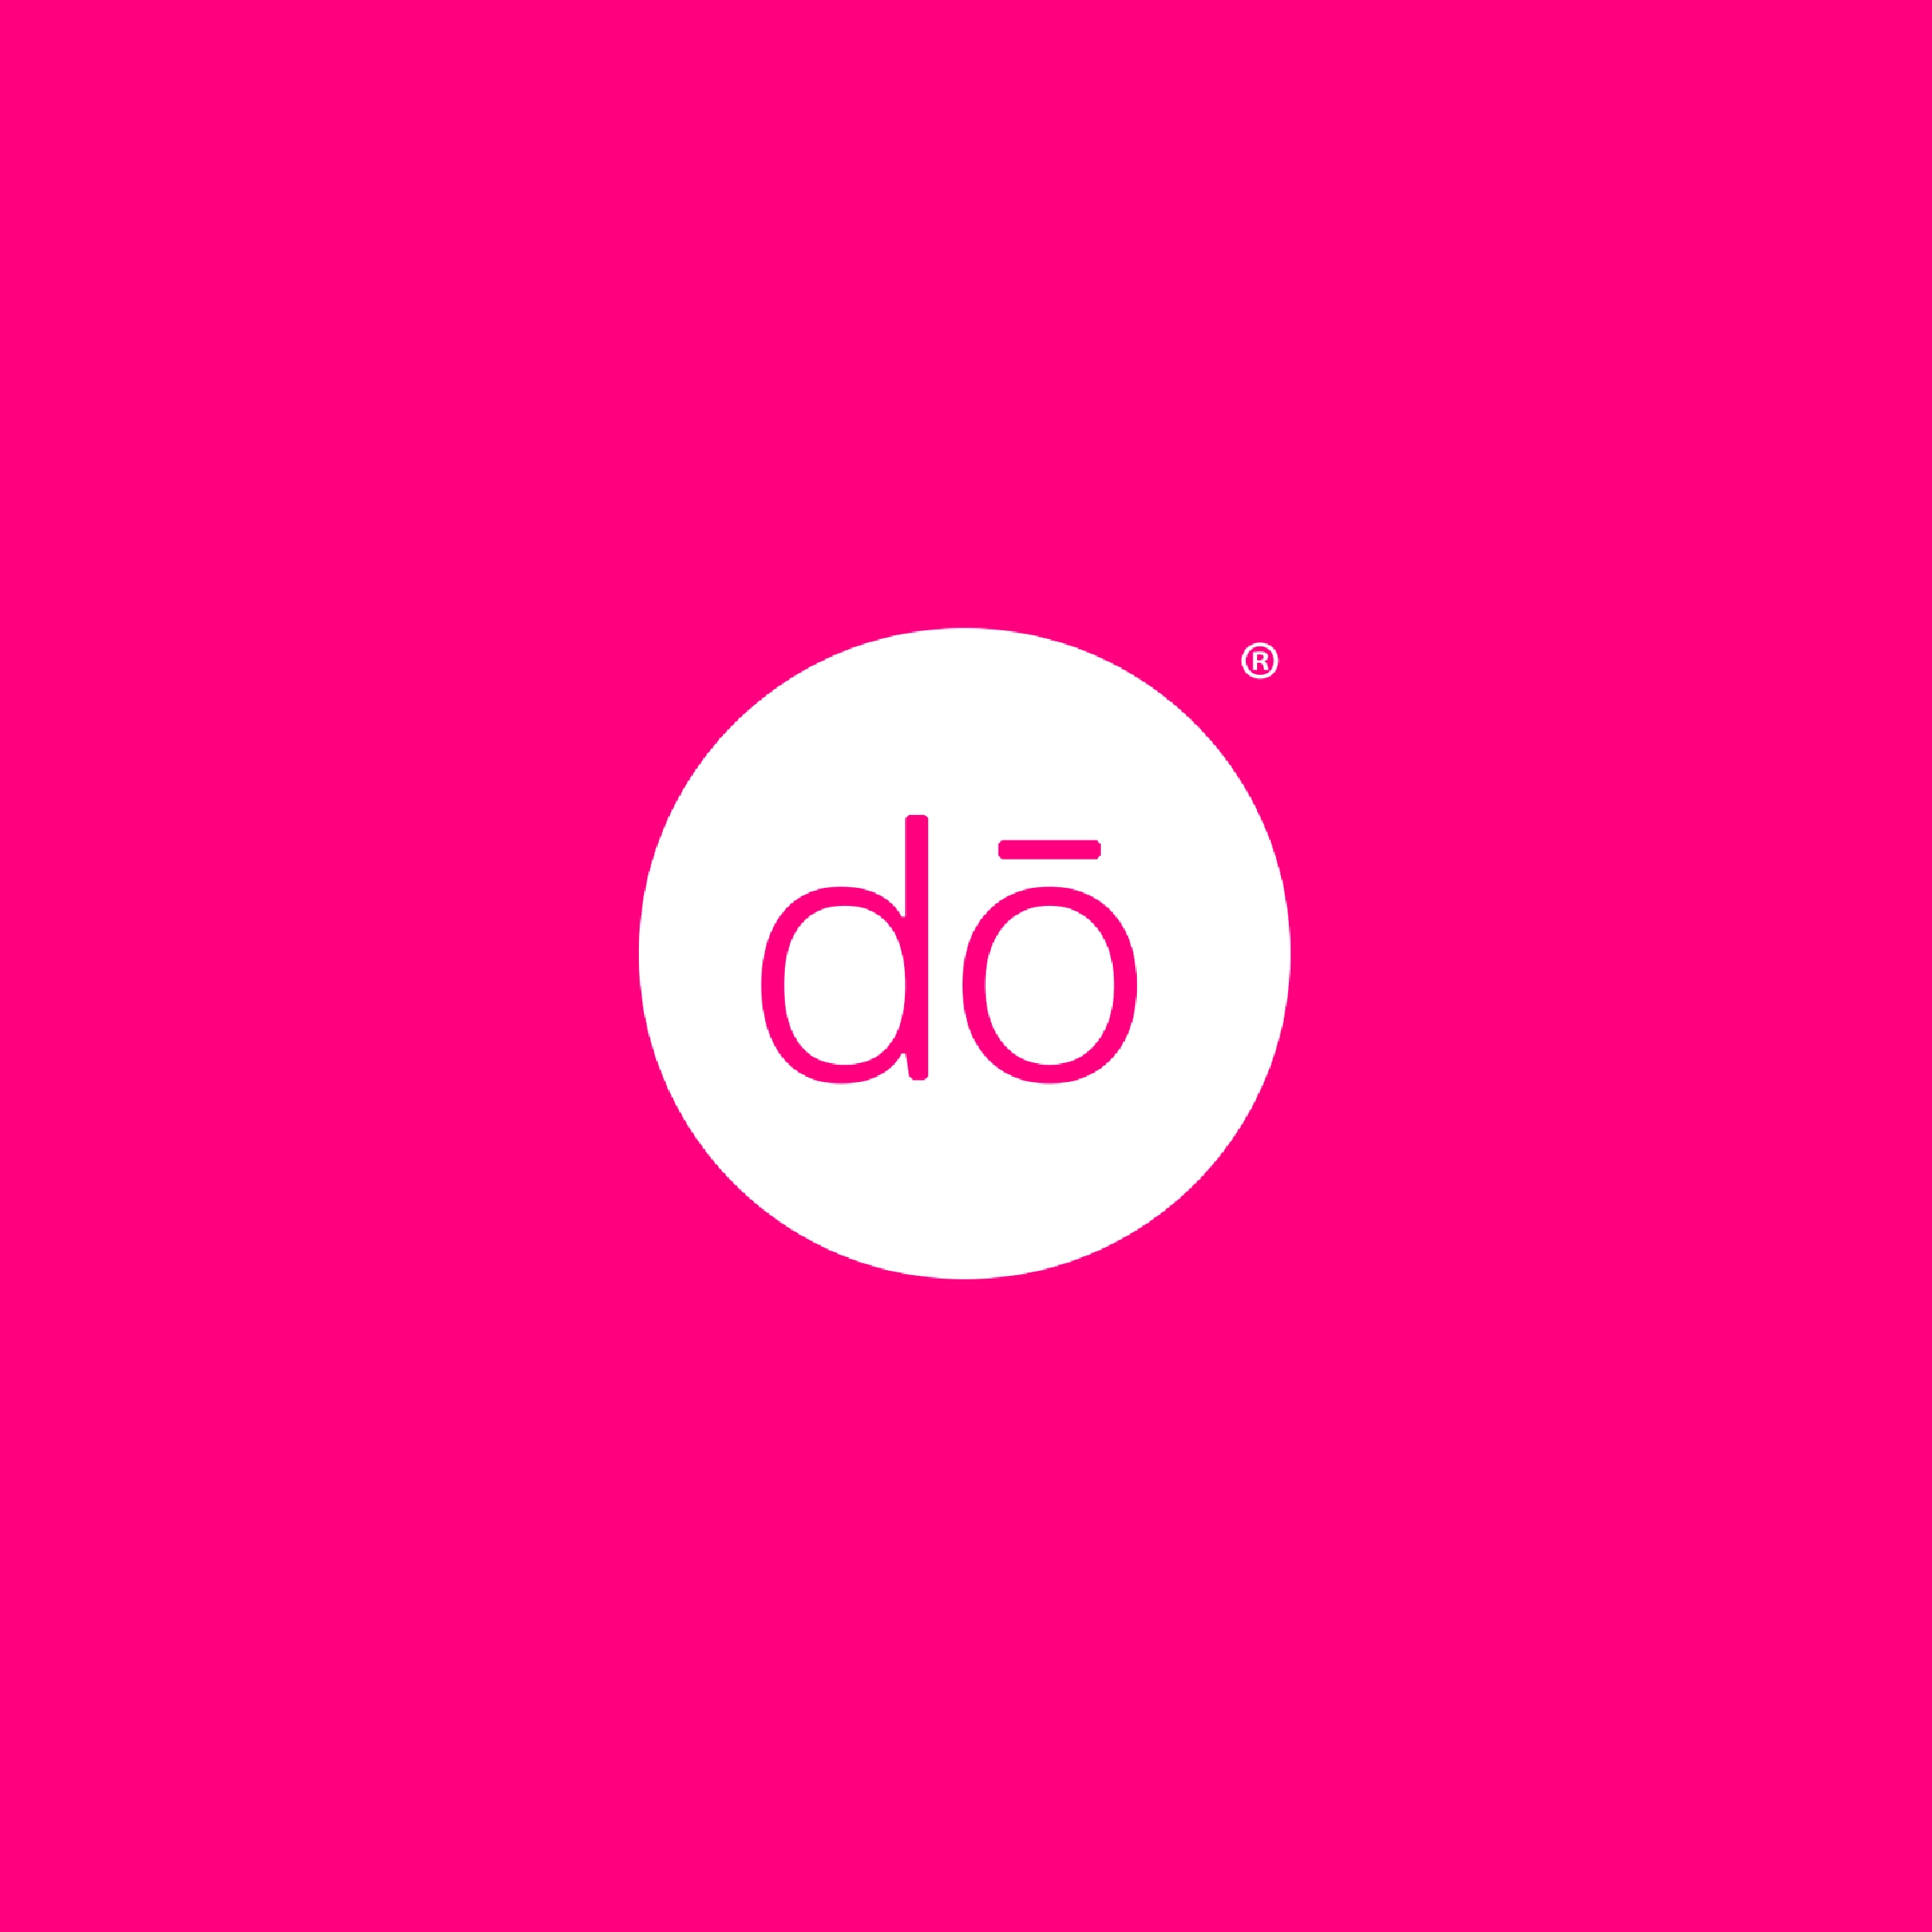 Starting a brand from scratch with DŌ